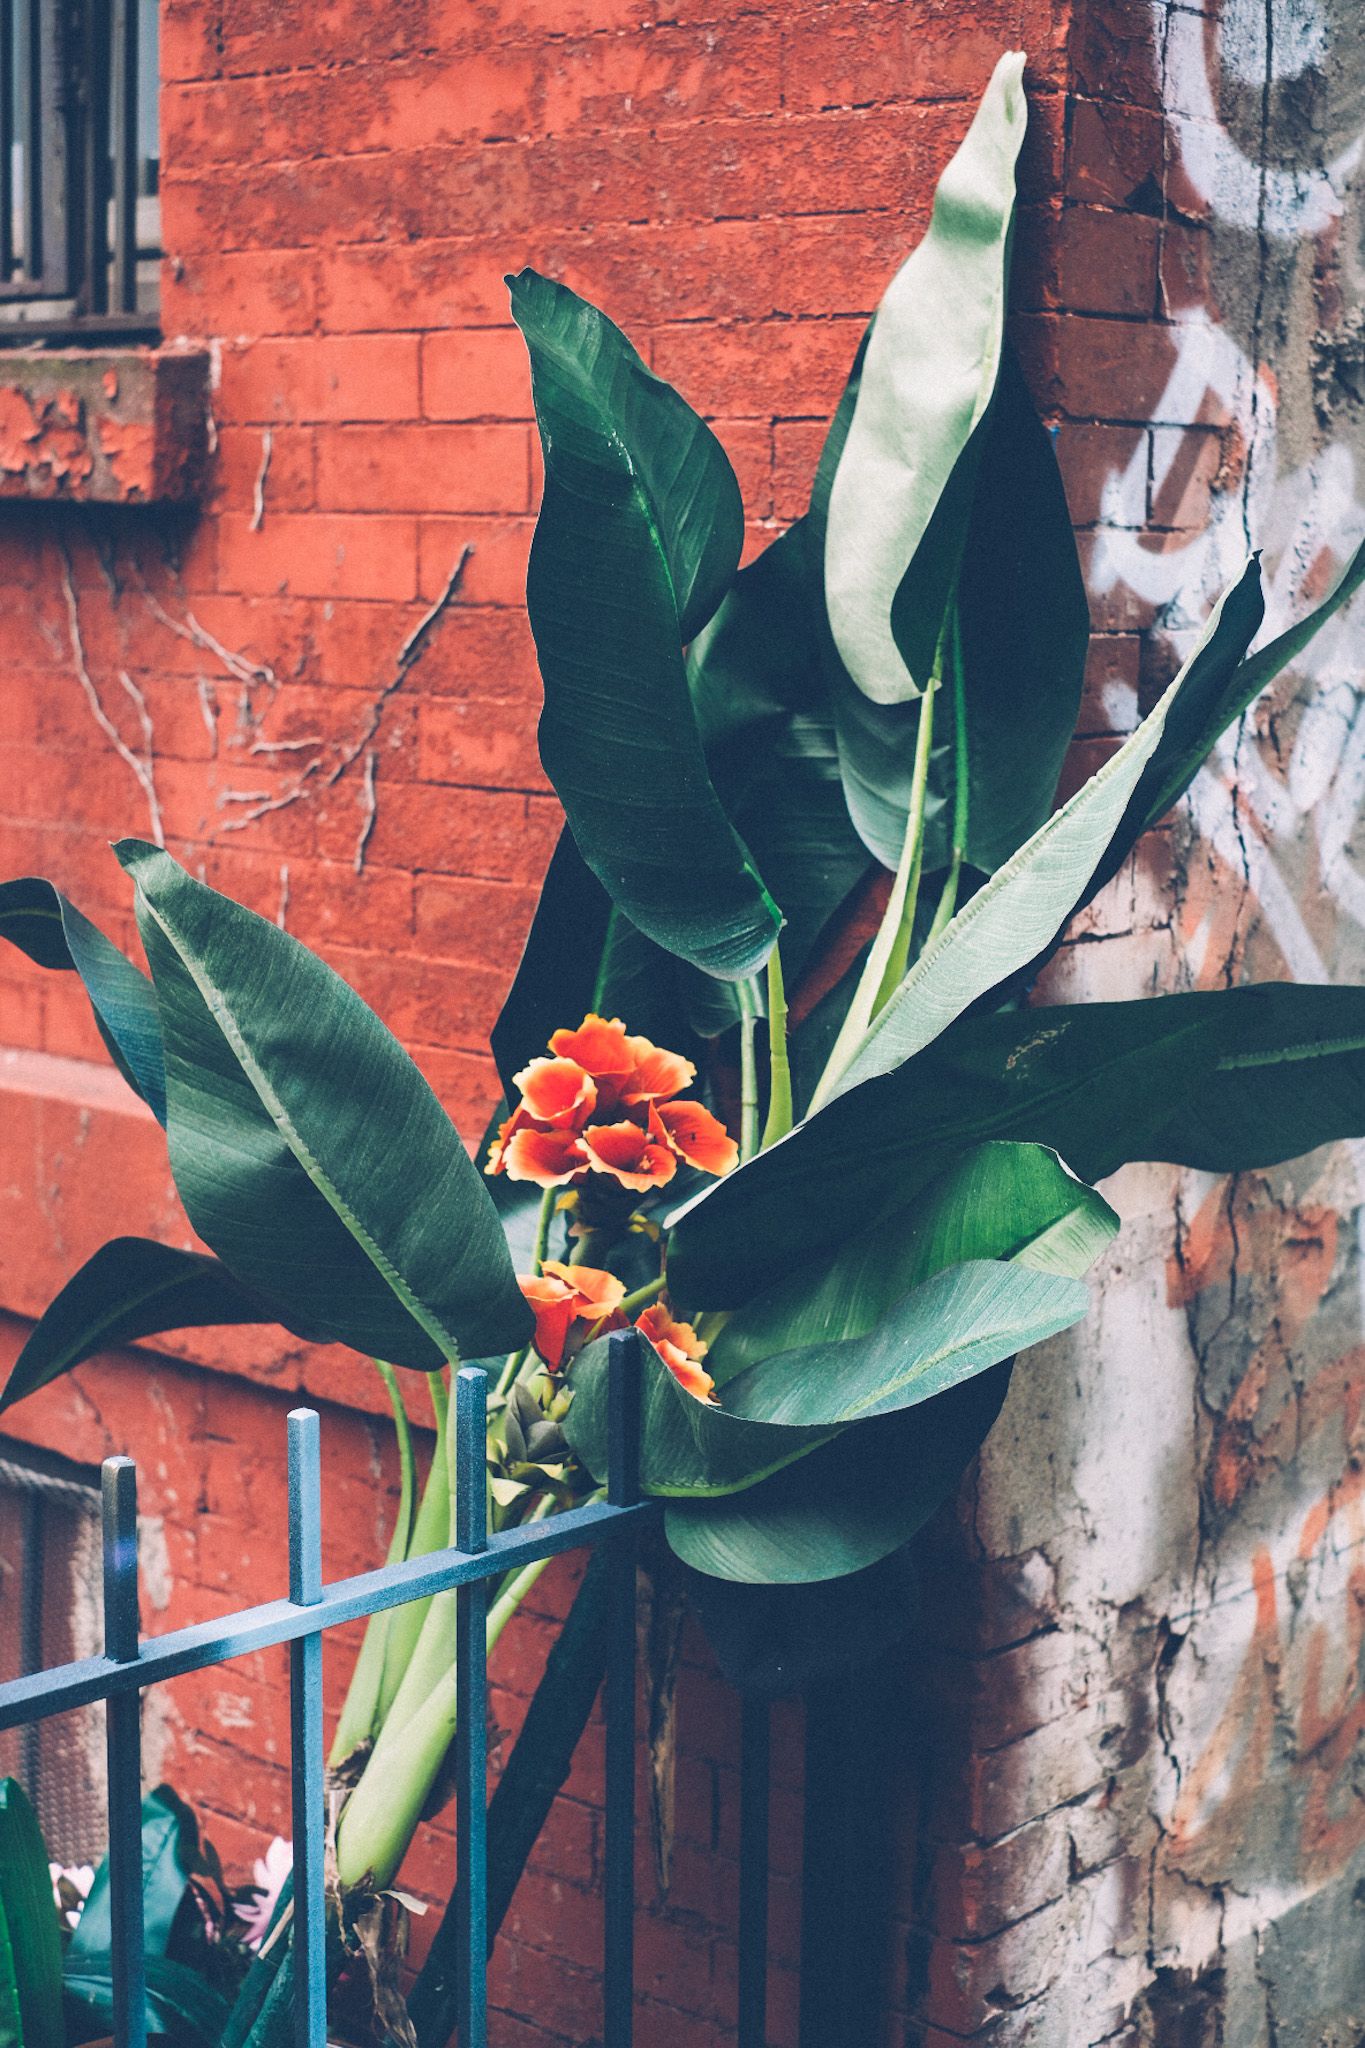 A bird of paradise has blossomed orange flowers, wrapped and leaning against a black gate against a brick wall outside.